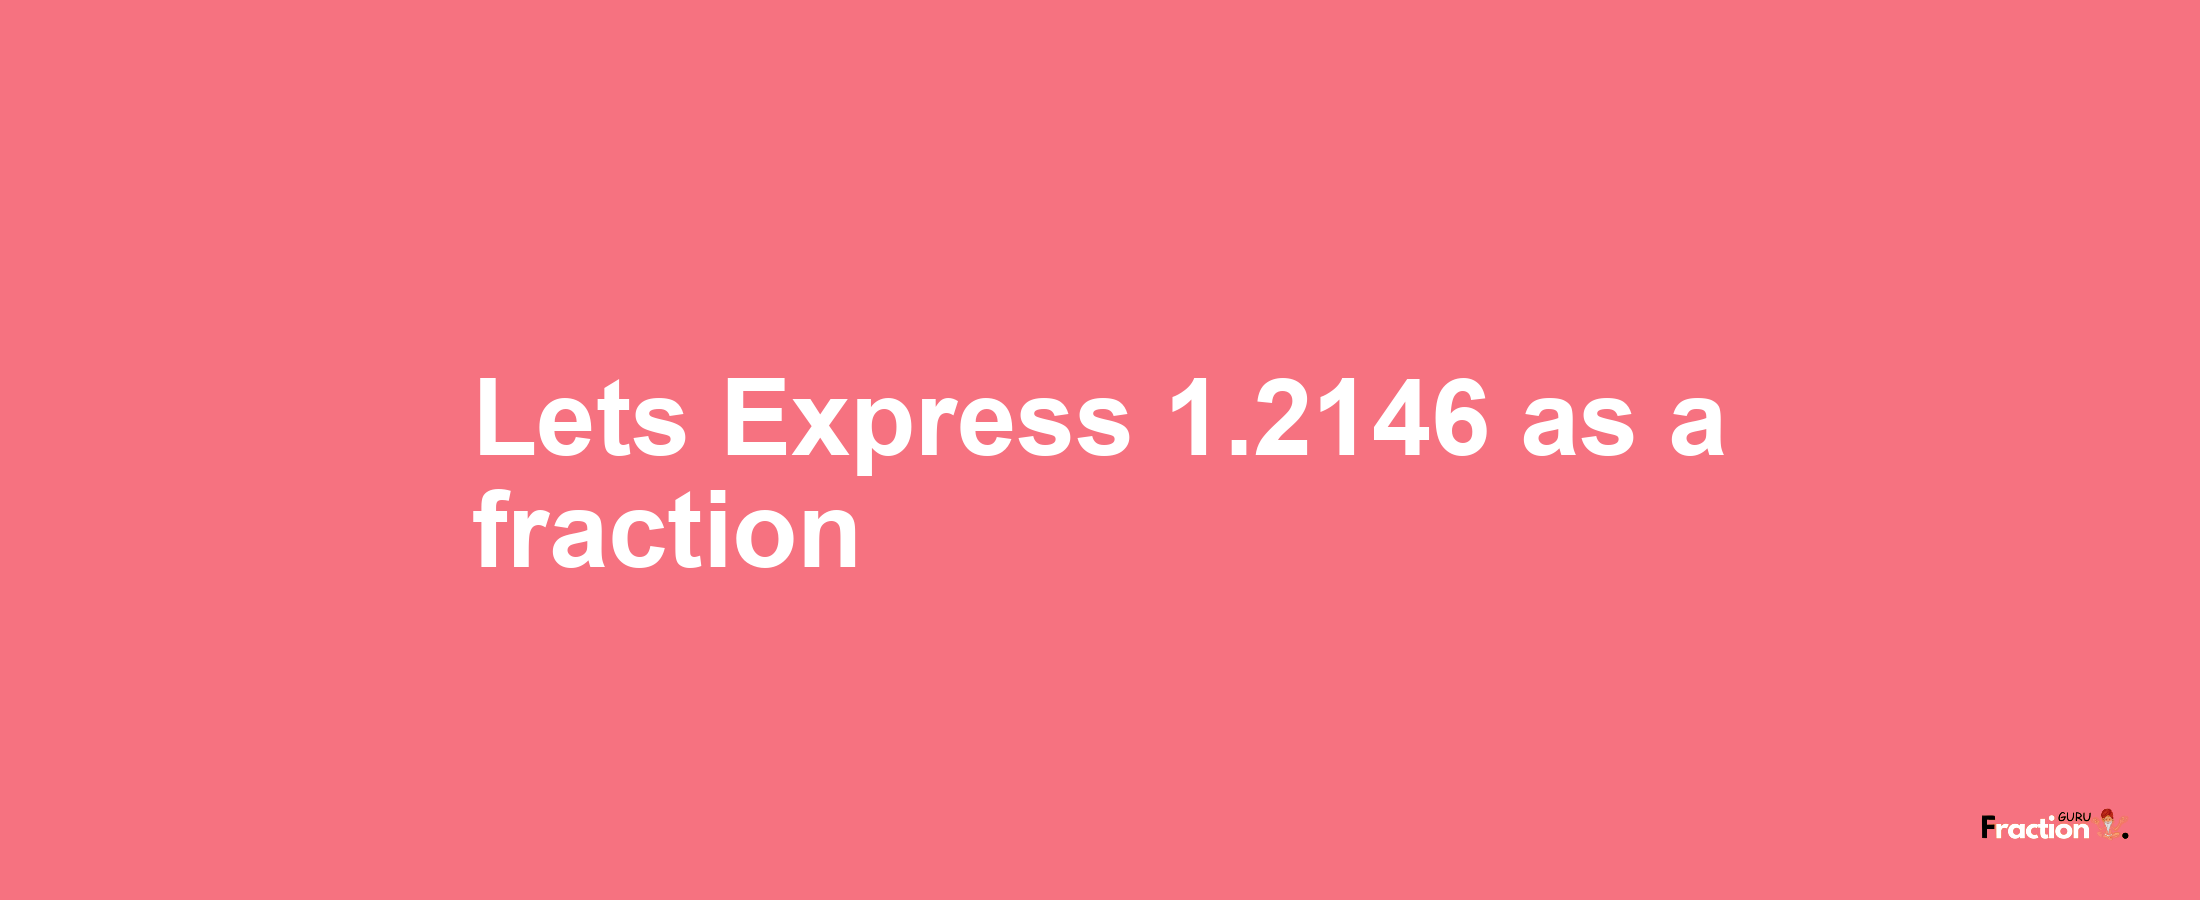 Lets Express 1.2146 as afraction